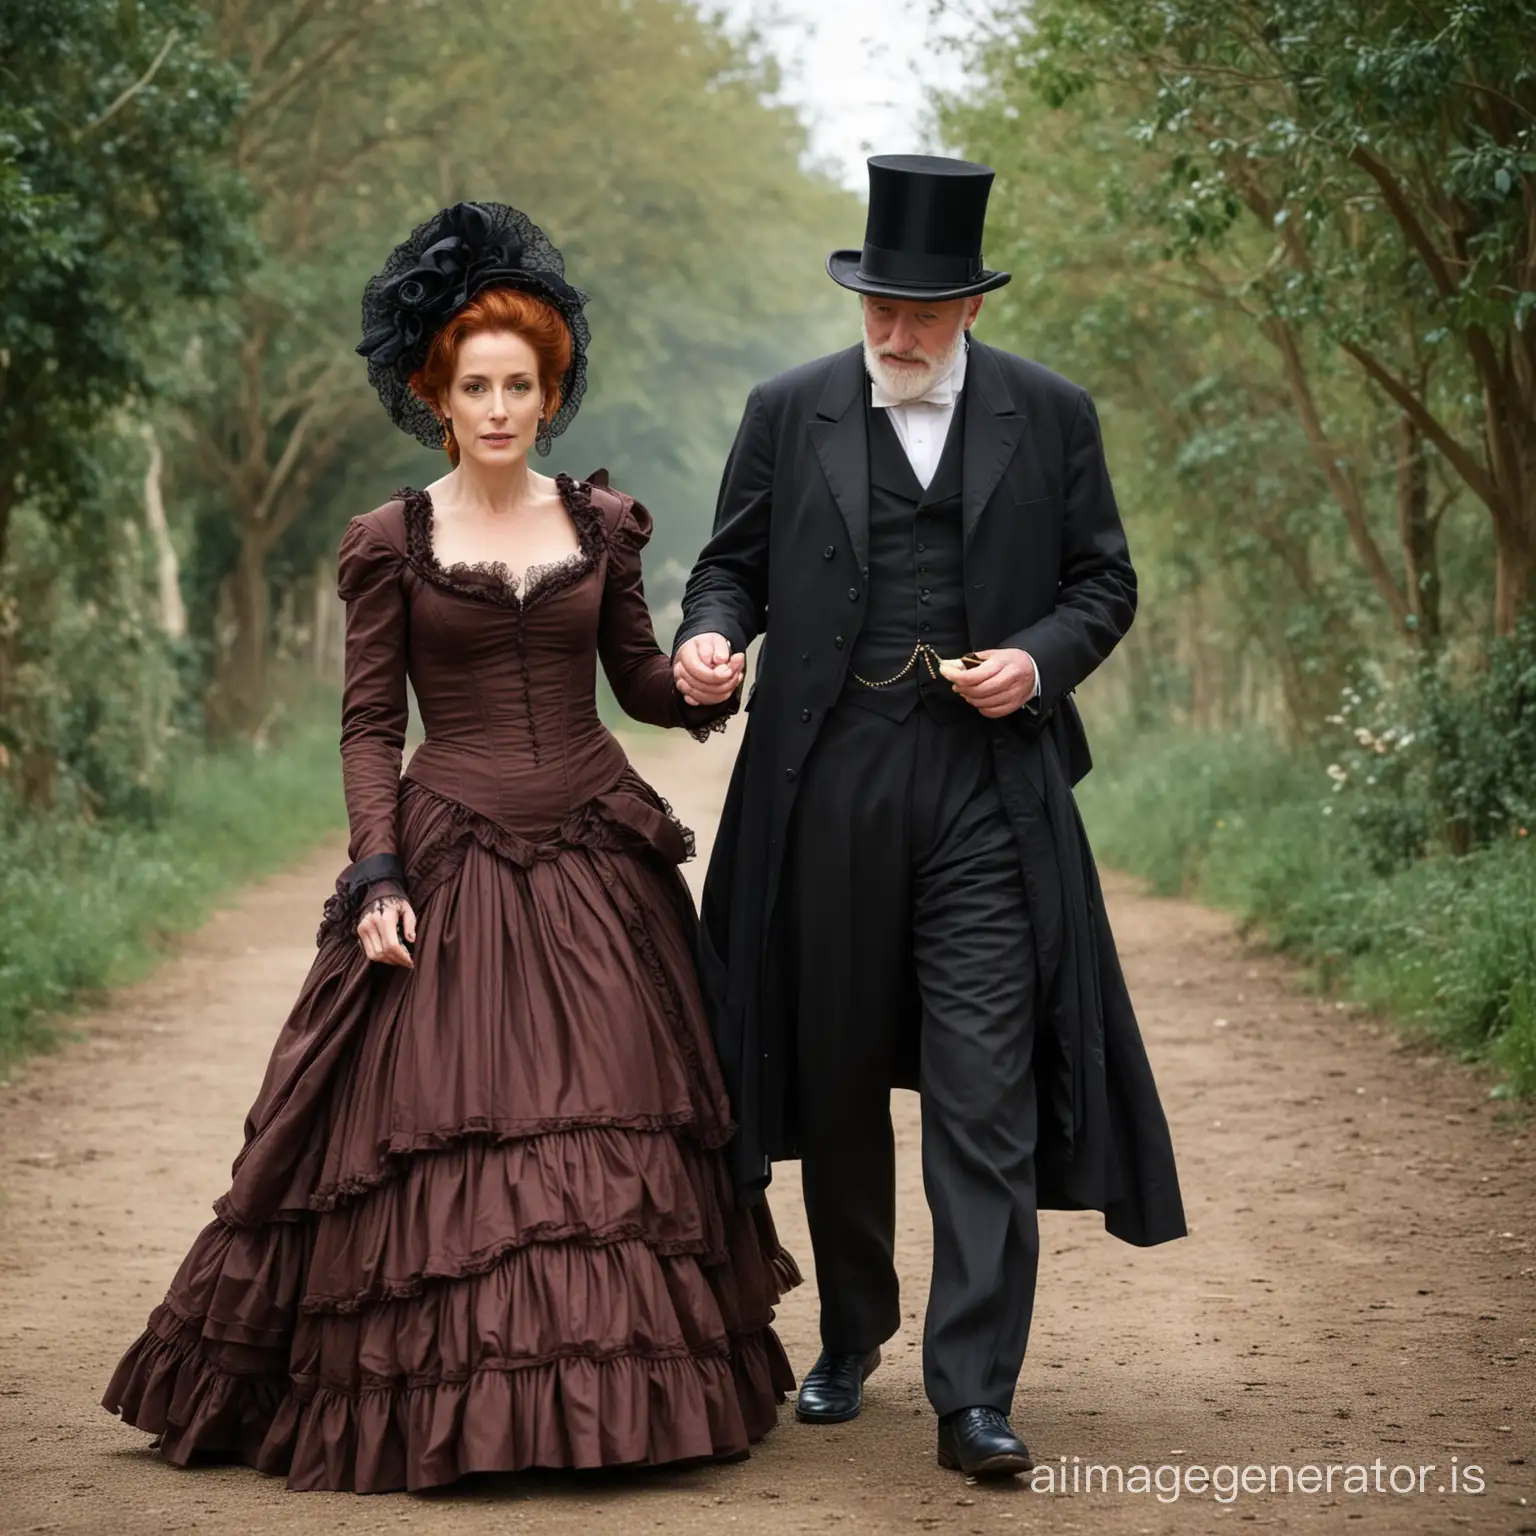 Elegant-RedHaired-Bride-in-Victorian-Attire-with-Groom